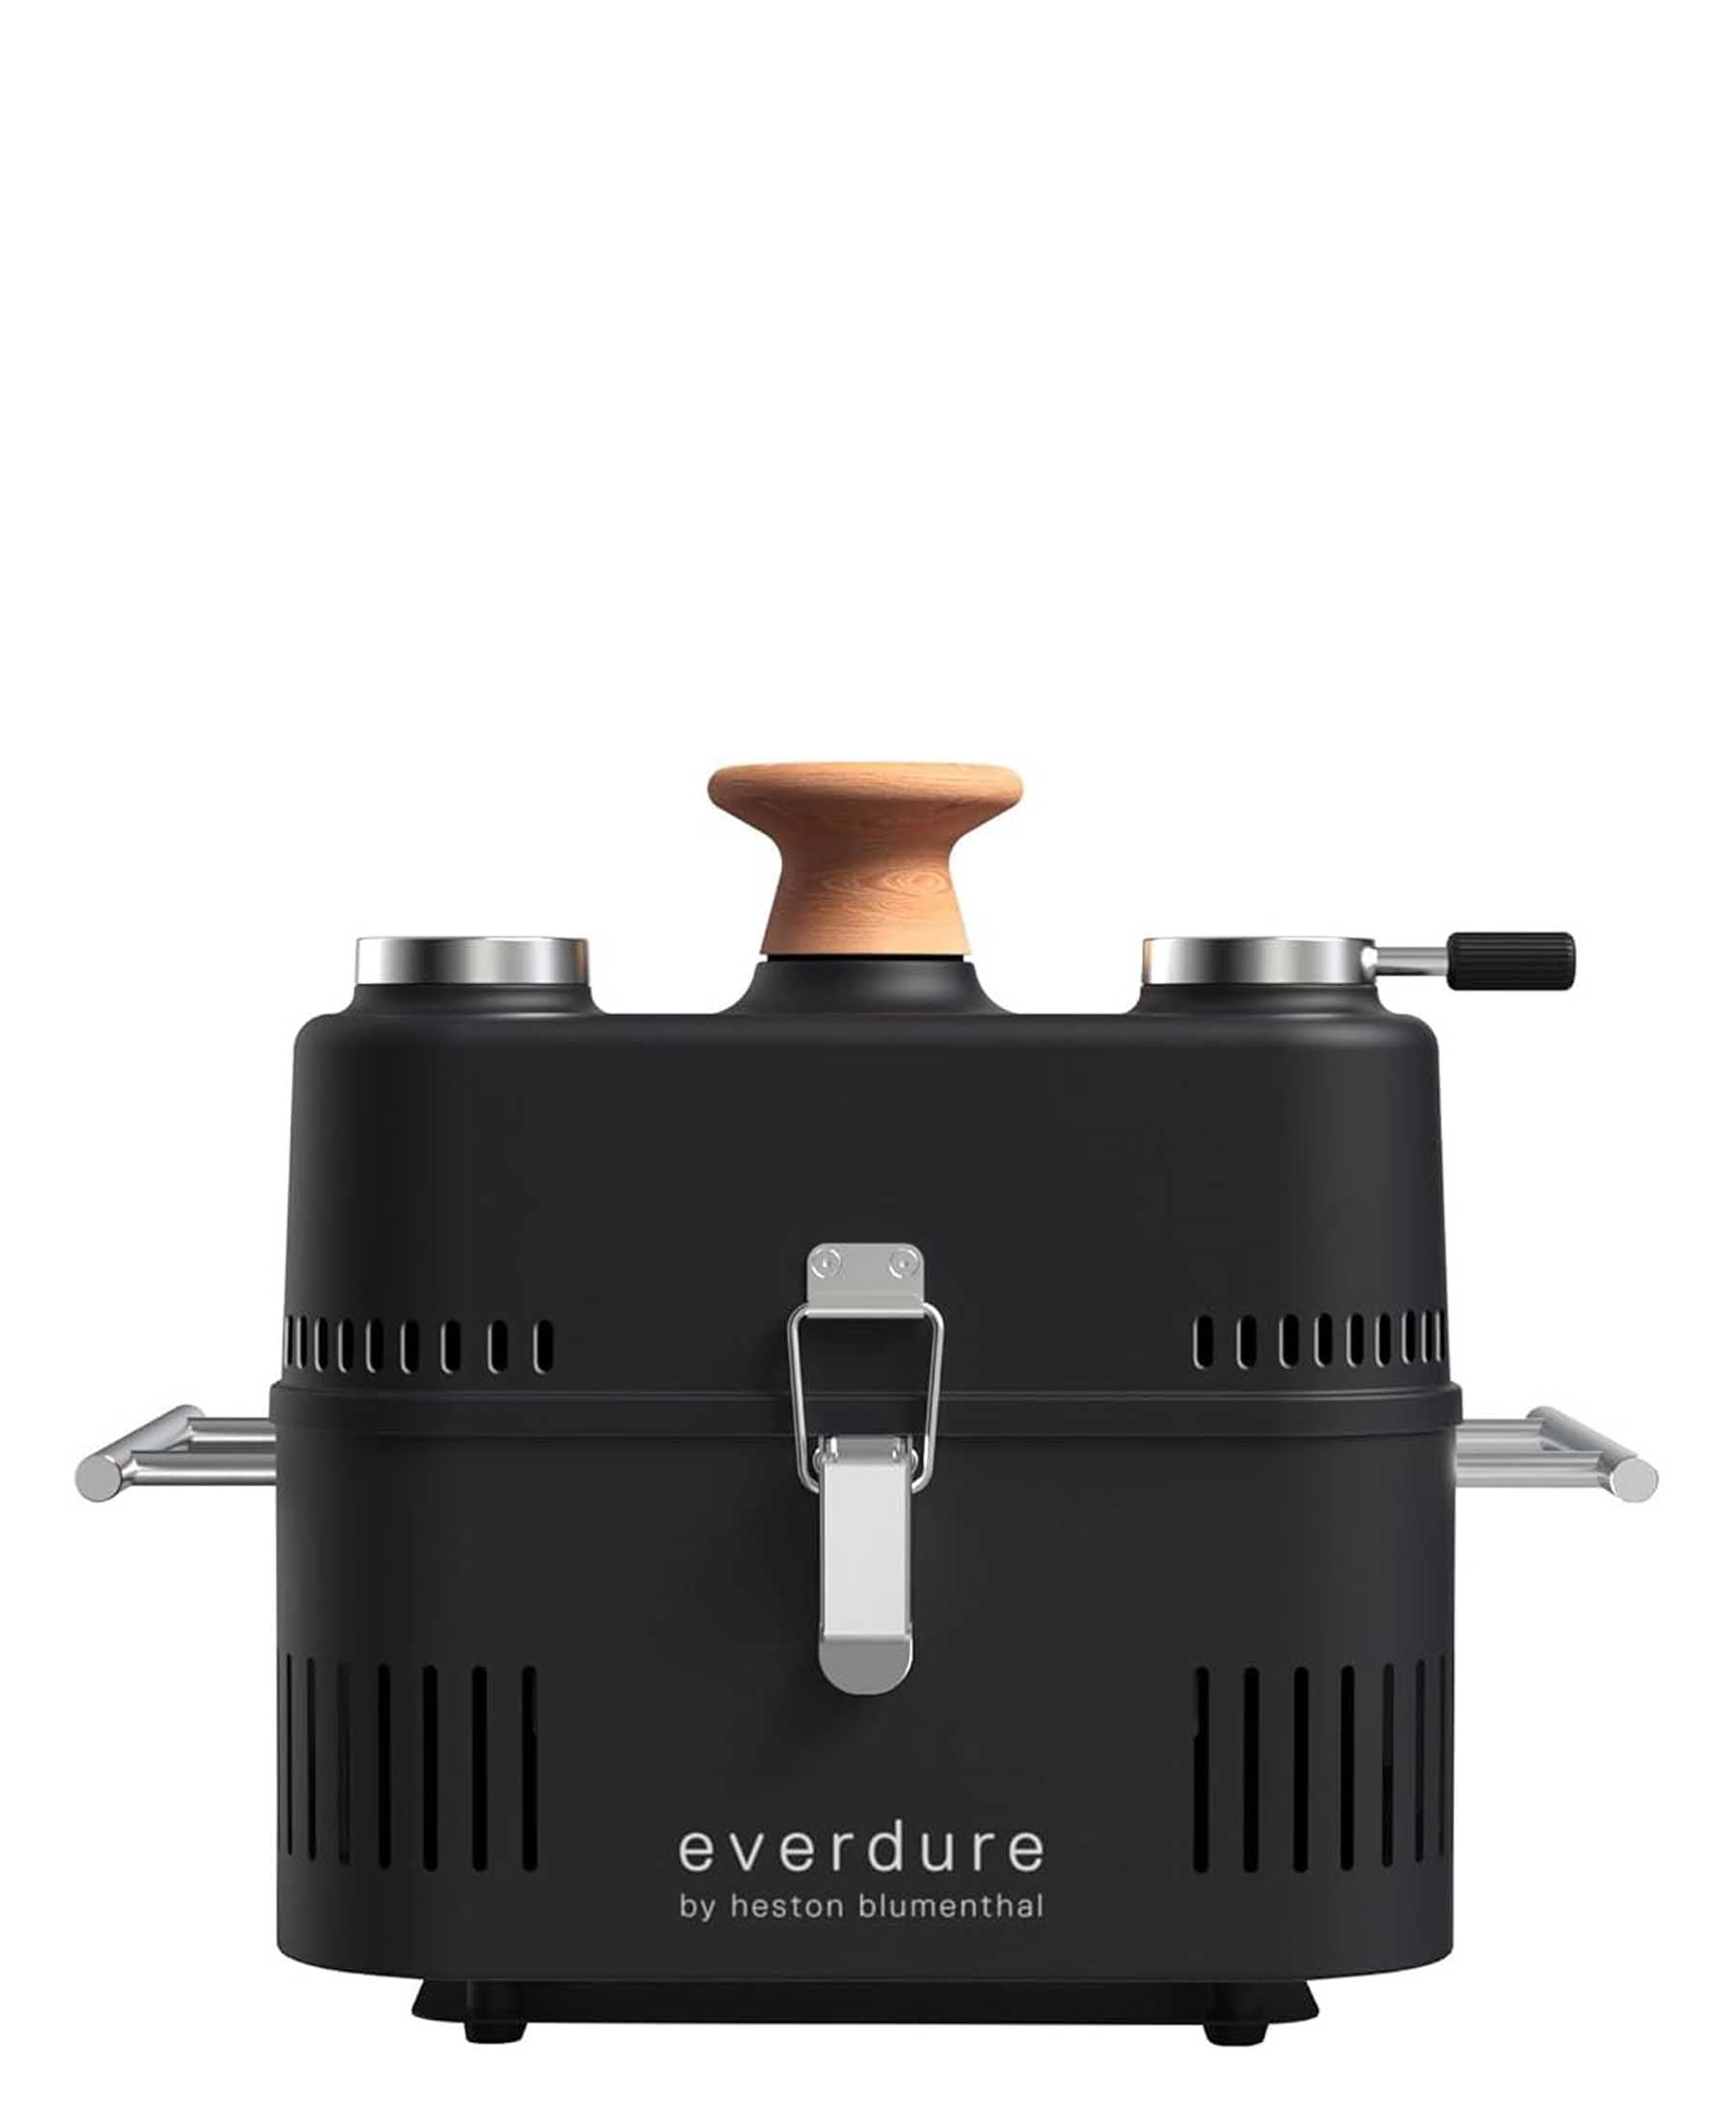 Everdure Cube 360 Charcoal Portable Barbeque & 3 Piece Tool Kit - Black